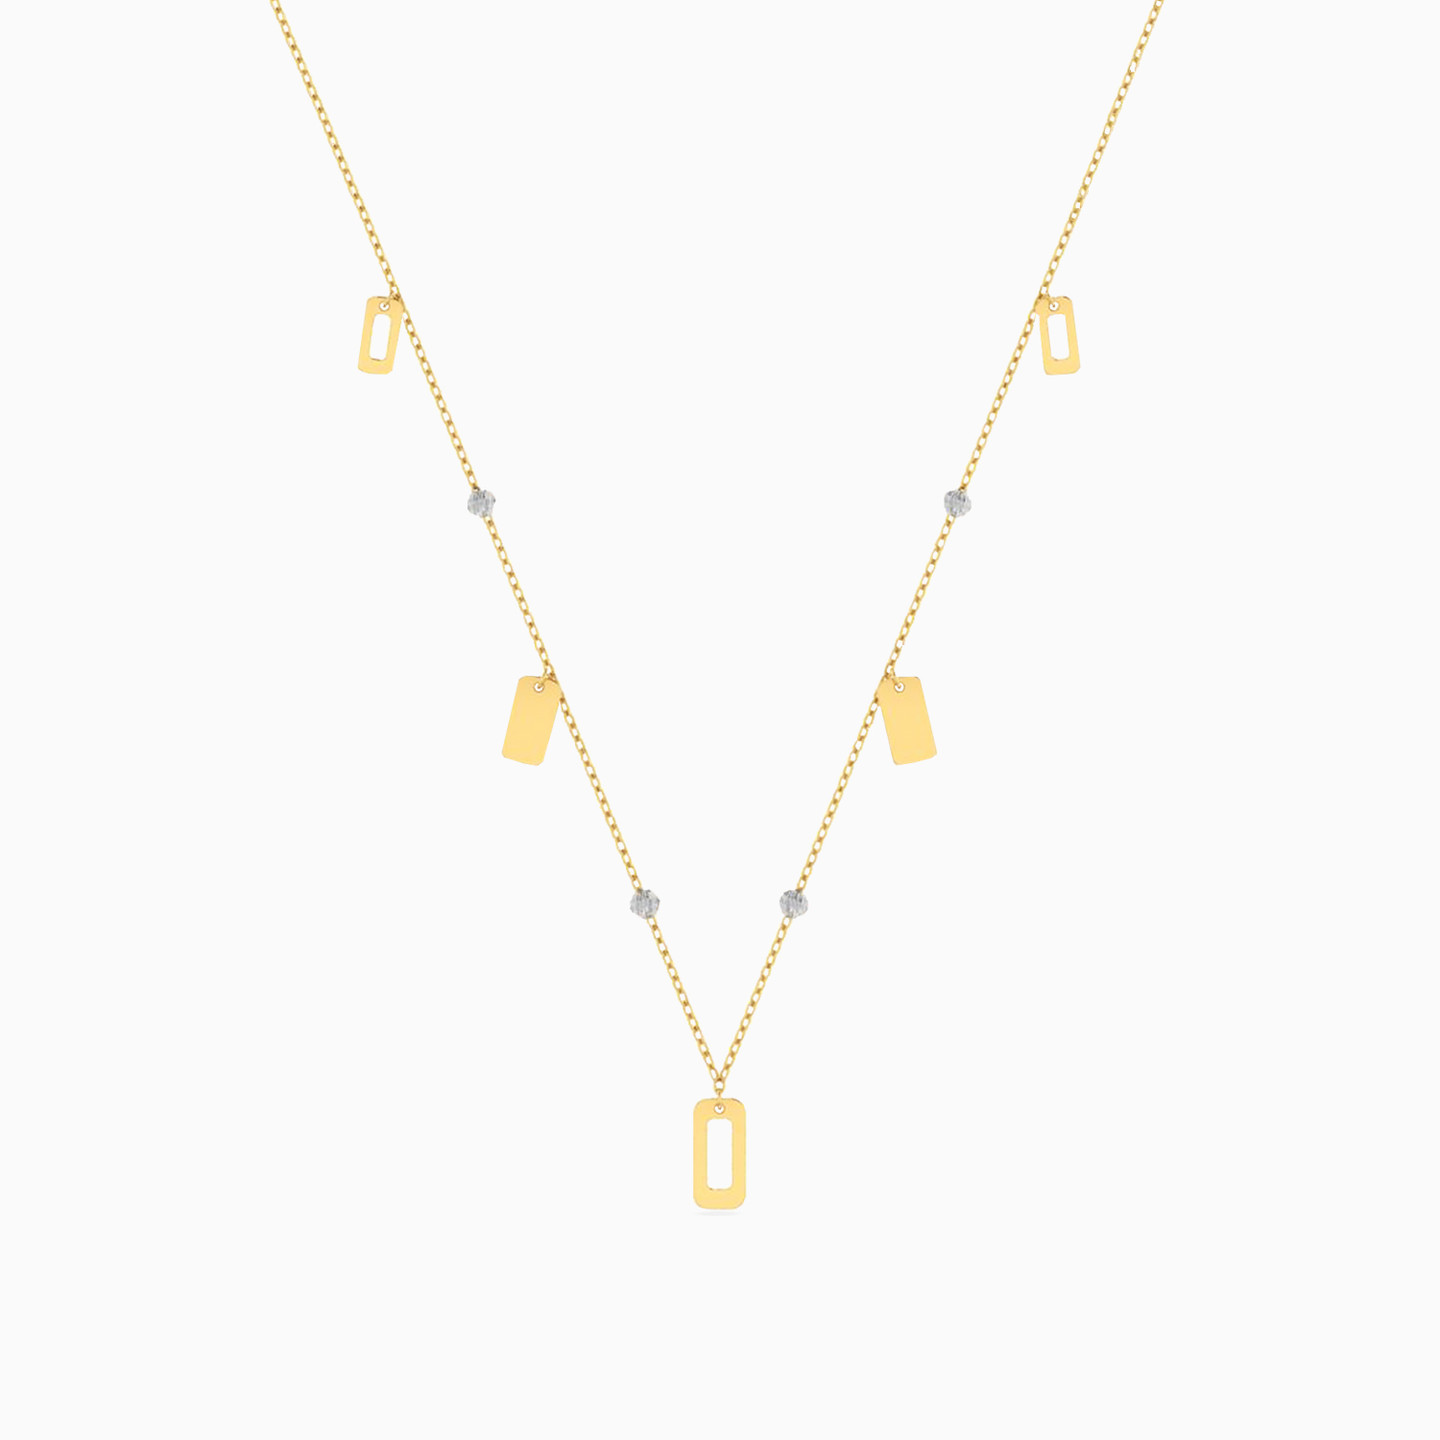 18K Gold Chain Necklace - 2